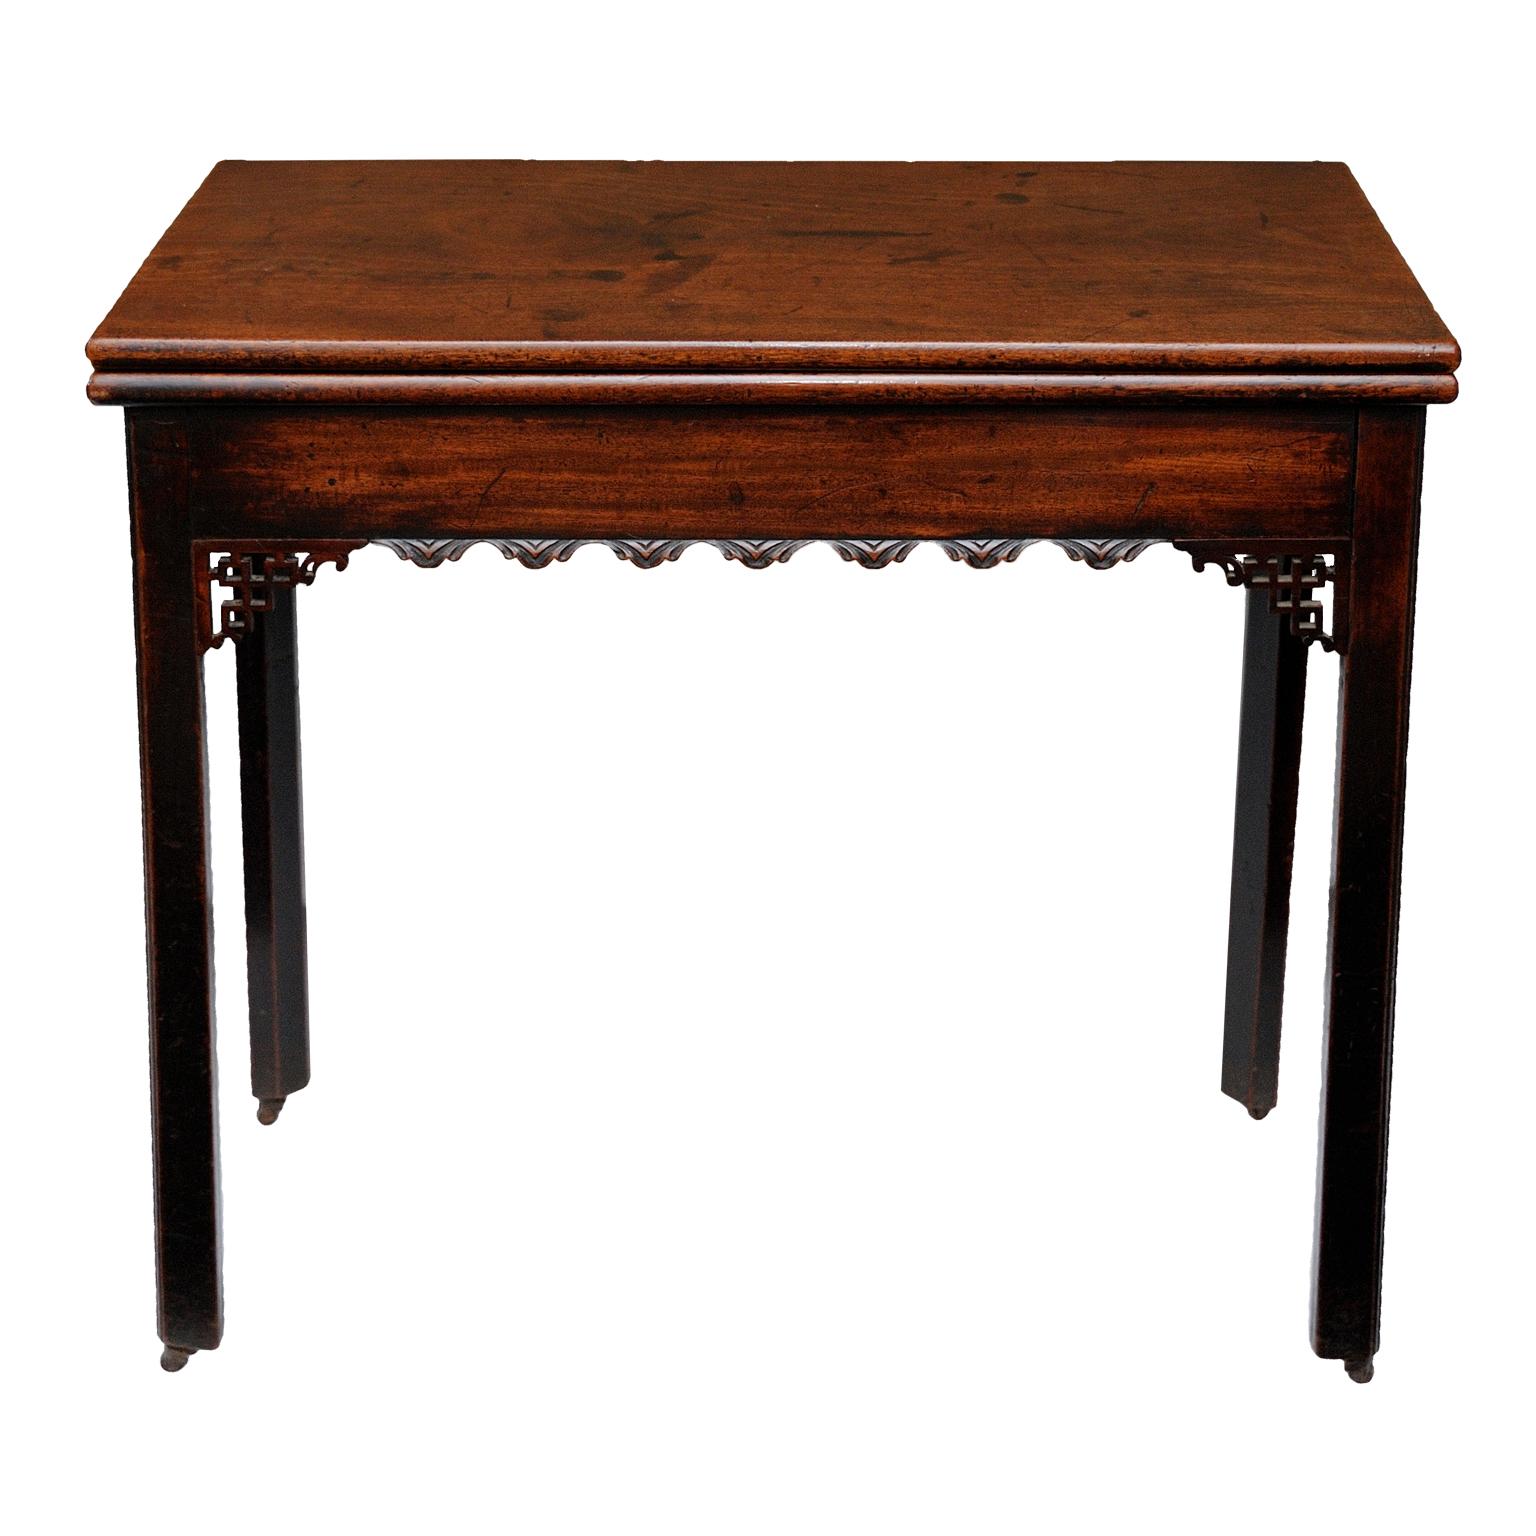 This is a rather attractive and rare Irish early George III Chippendale period mahogany Tea Table, decorated with Chinese fret spandrels and well carved frieze, complete with original castors, circa 1760. 

Measures:
Height Closed: 76cm (30